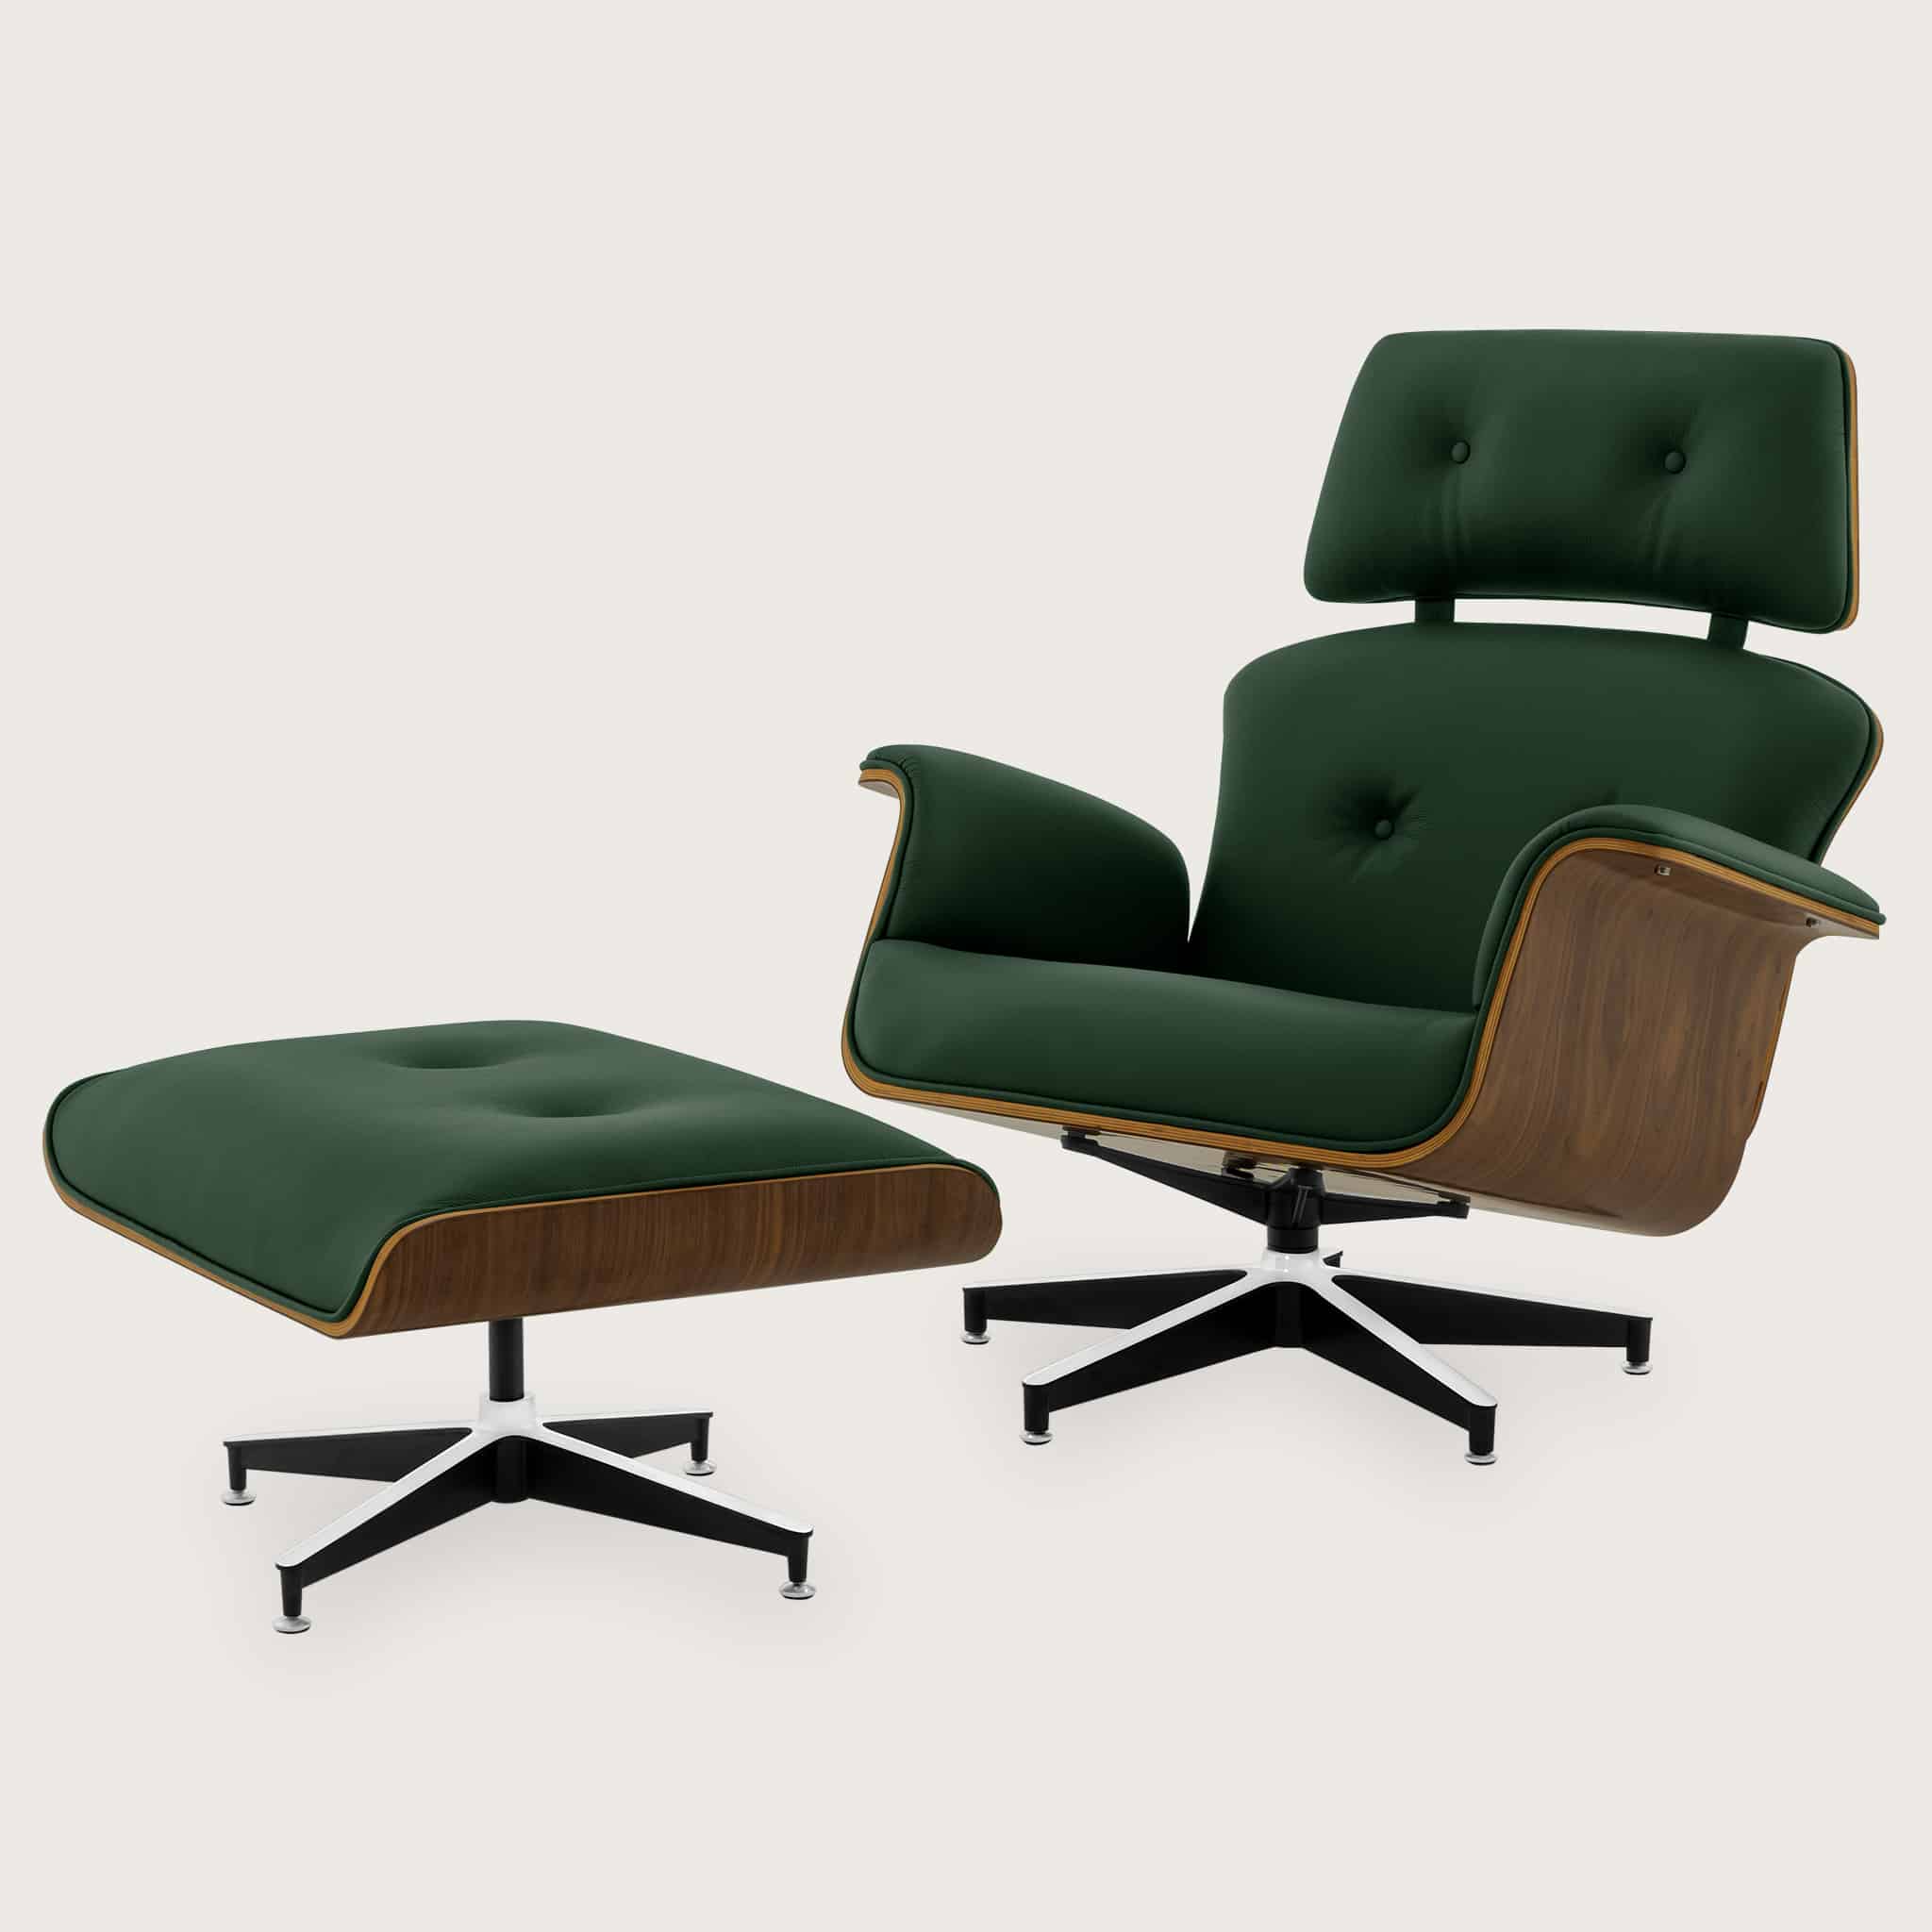 British-Racing-Green-Leather-Lounge-Chair-and-Stool_01.jpg